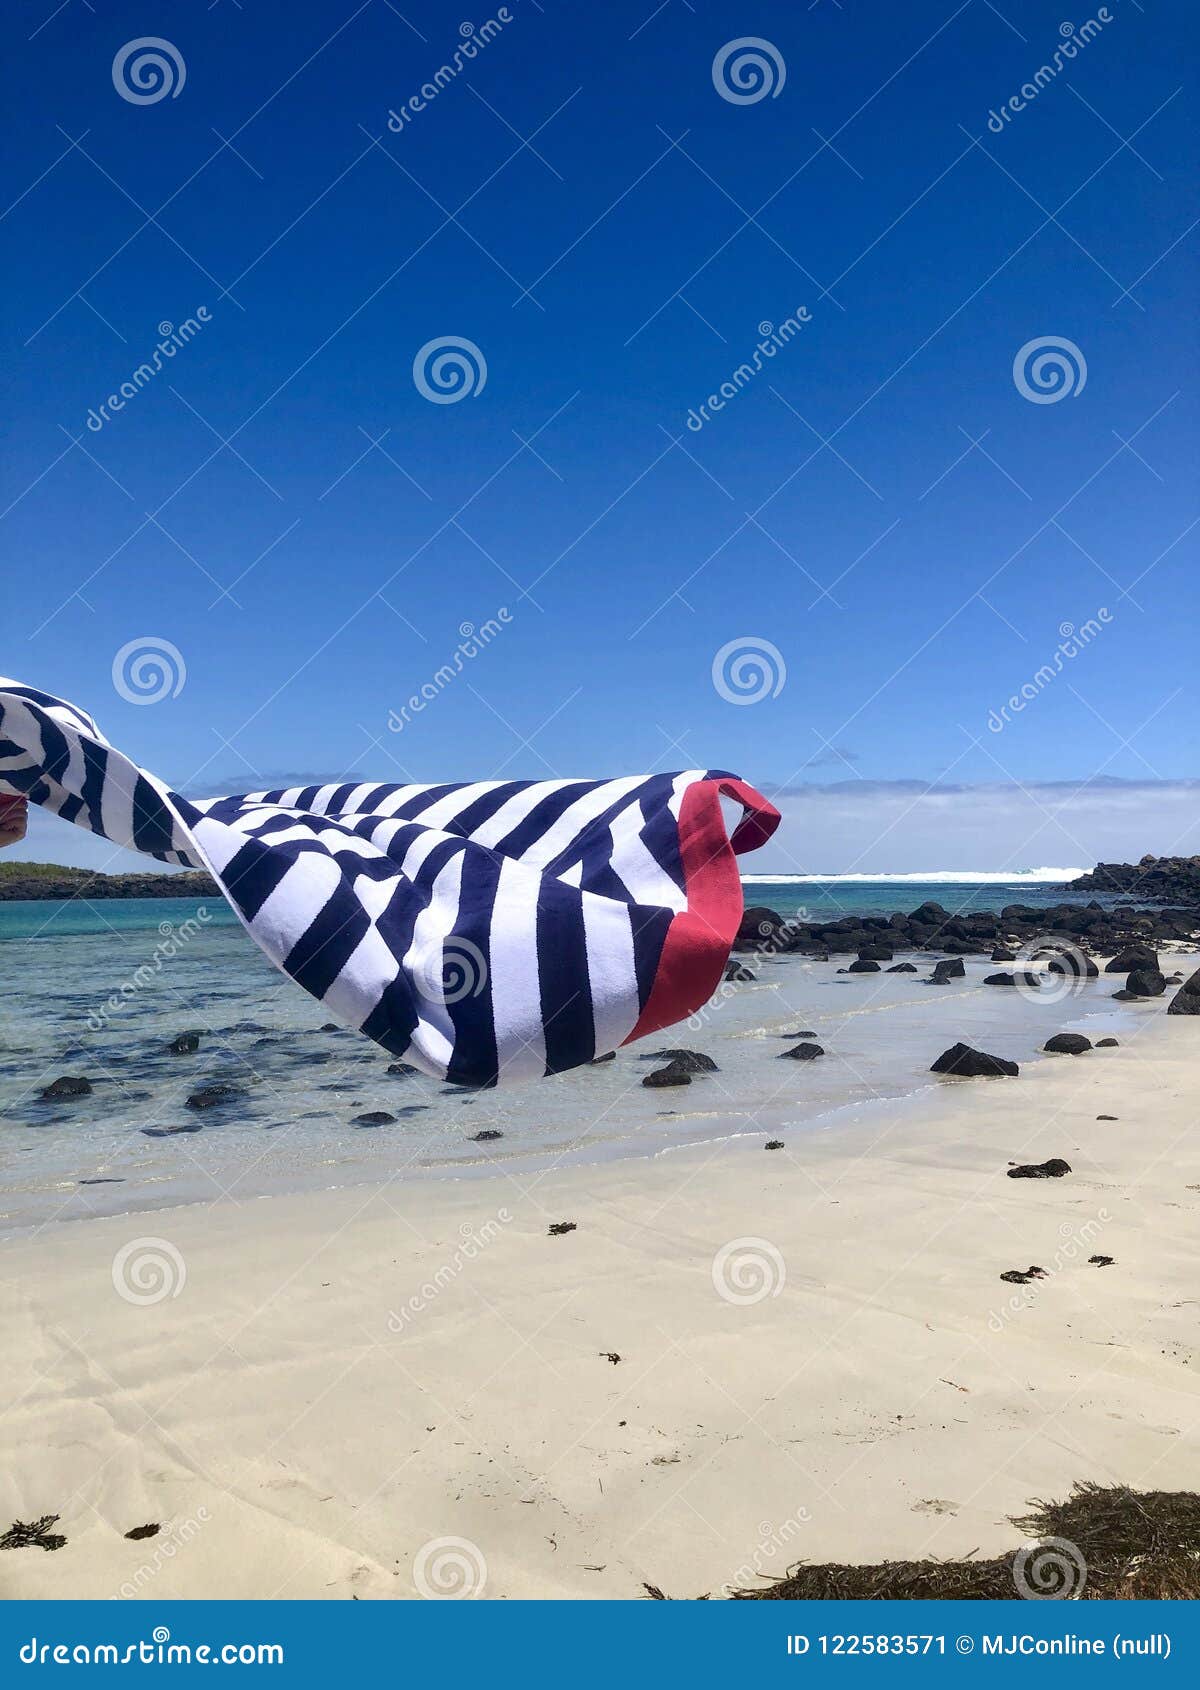 Stripe Towel on the Beach in Summer Stock Image - Image of ocean, surf ...